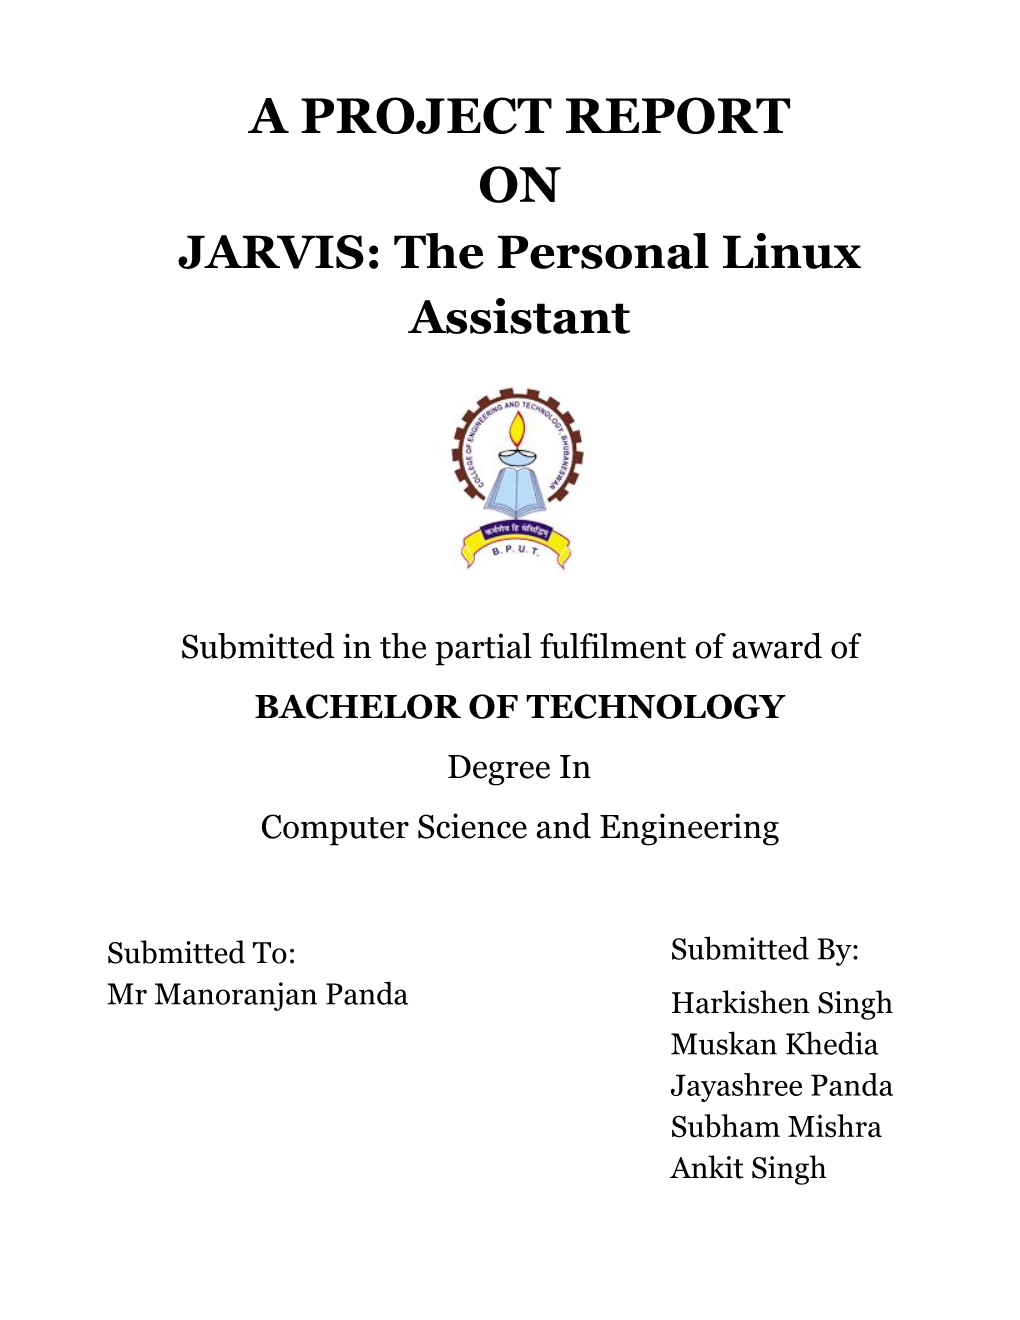 A PROJECT REPORT on JARVIS: the Personal Linux Assistant